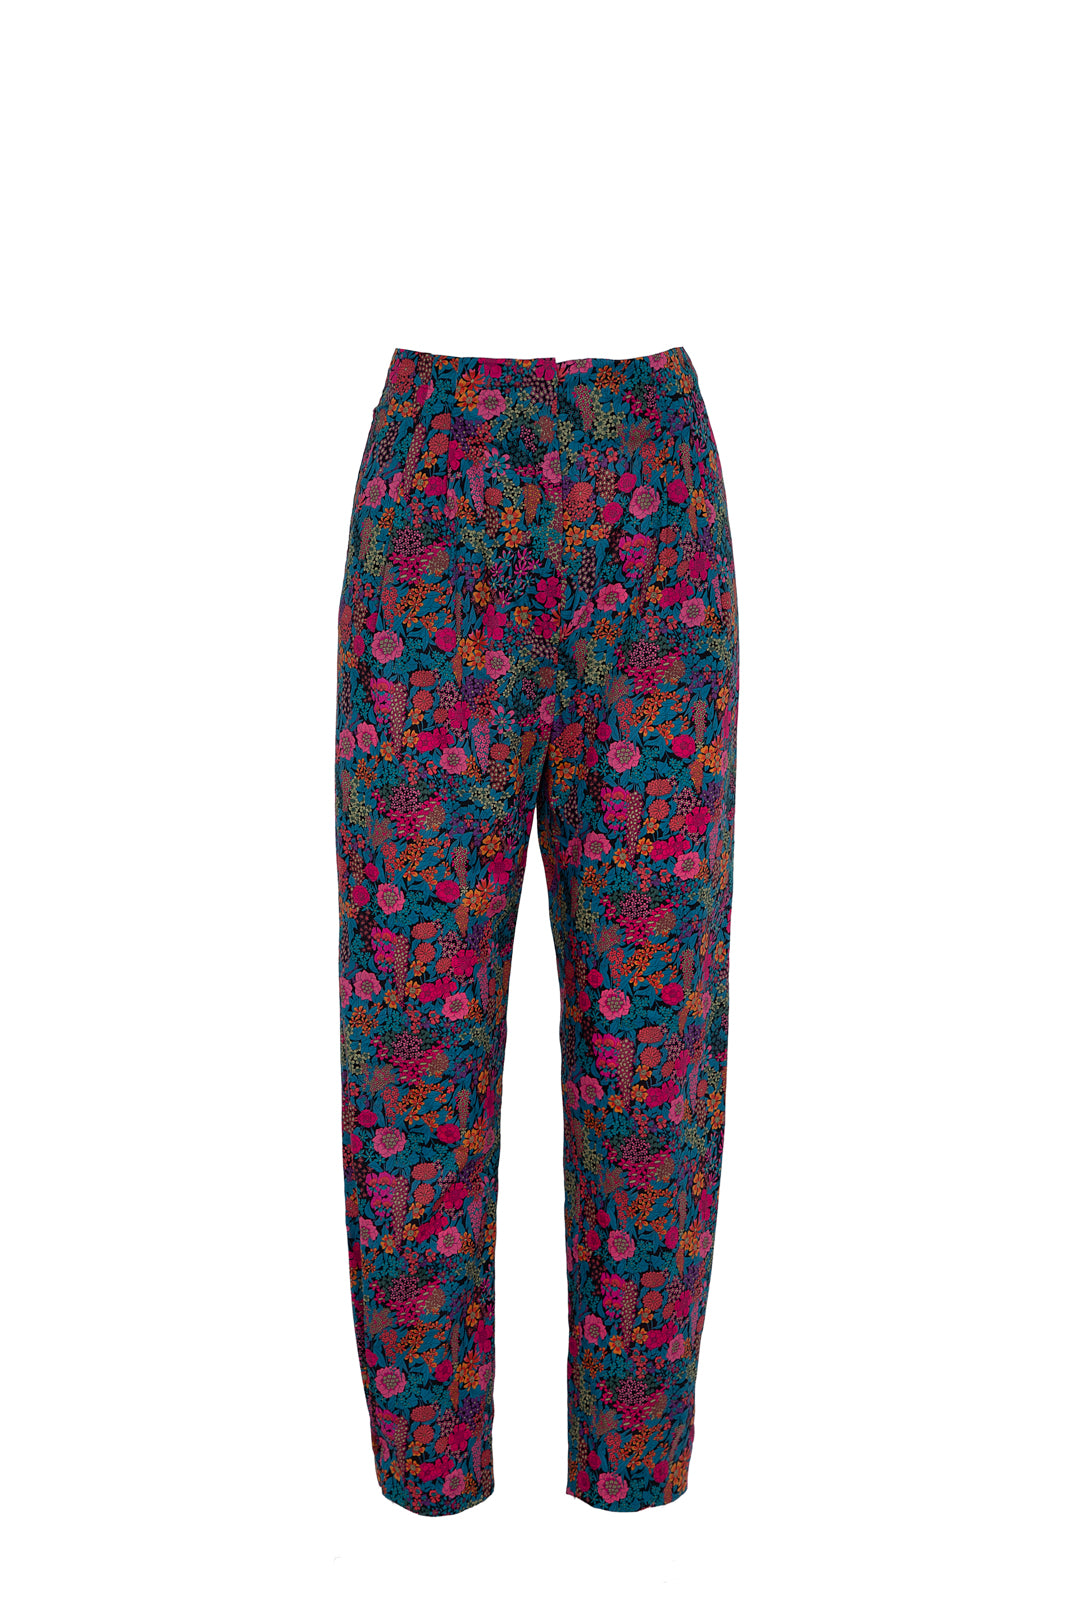  LIBERTY FOREST FLOWER ELISA TROUSERS